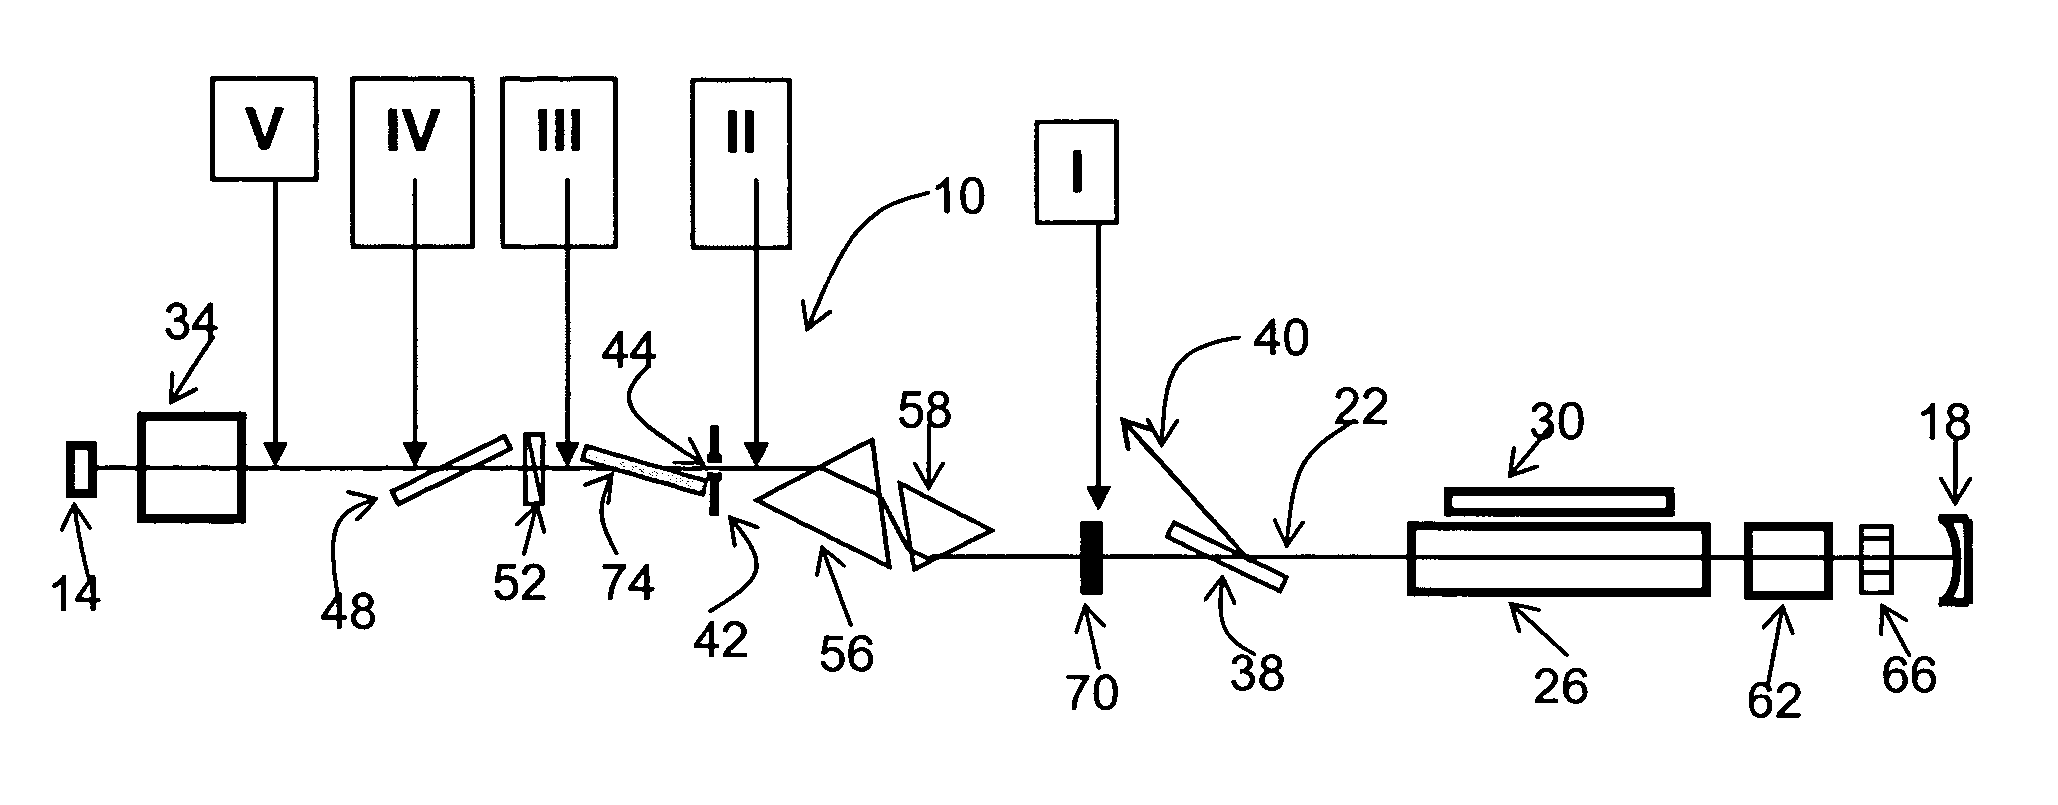 Mode-locked laser with variable pulse duration